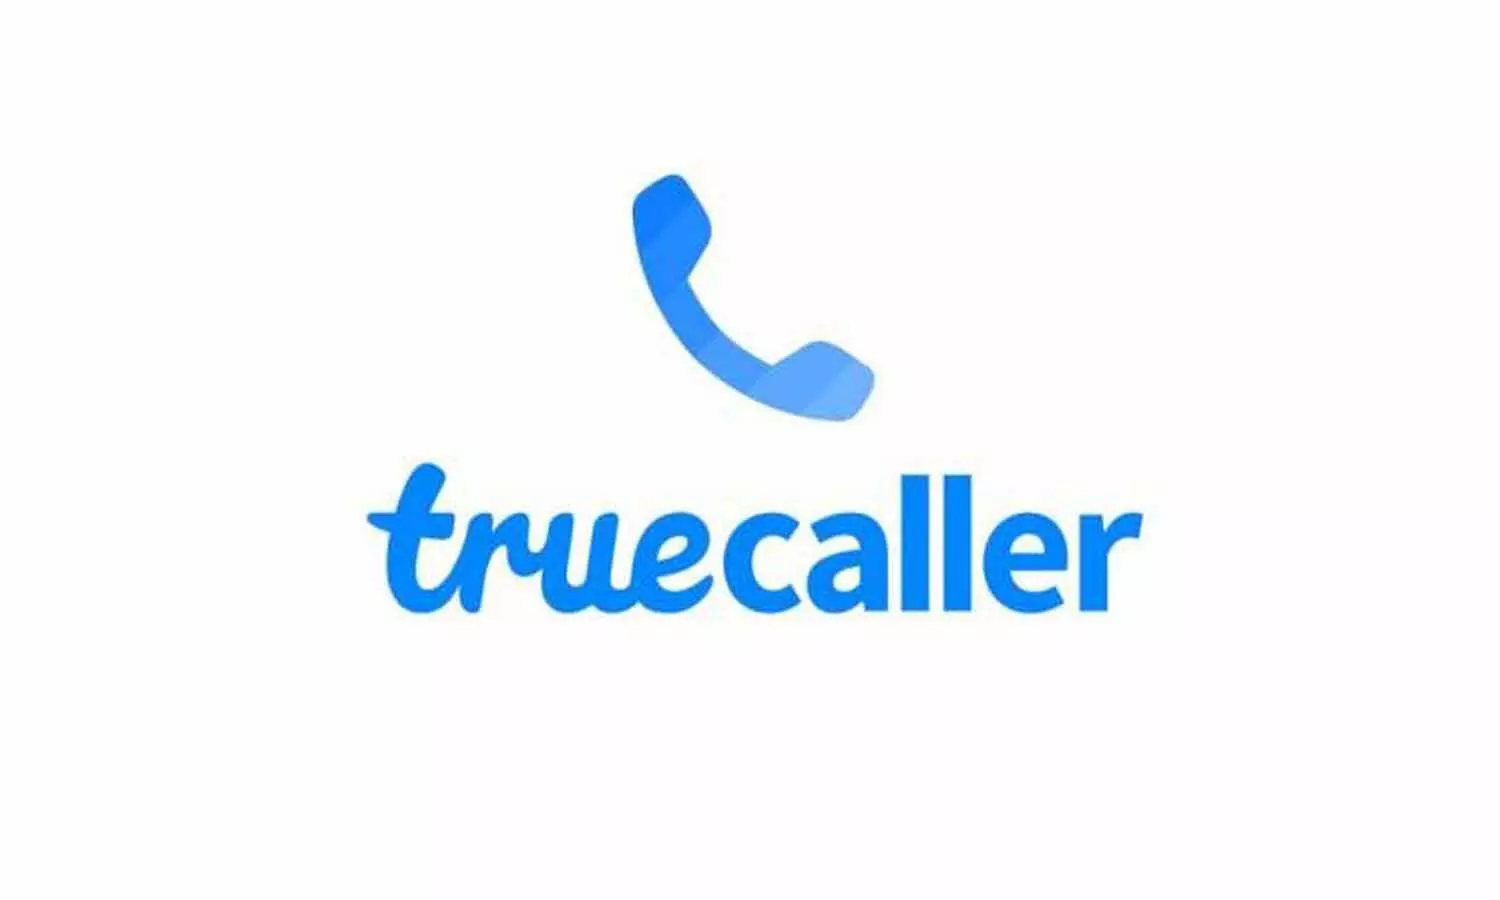 Check out what you are getting in the new Truecaller 12 update